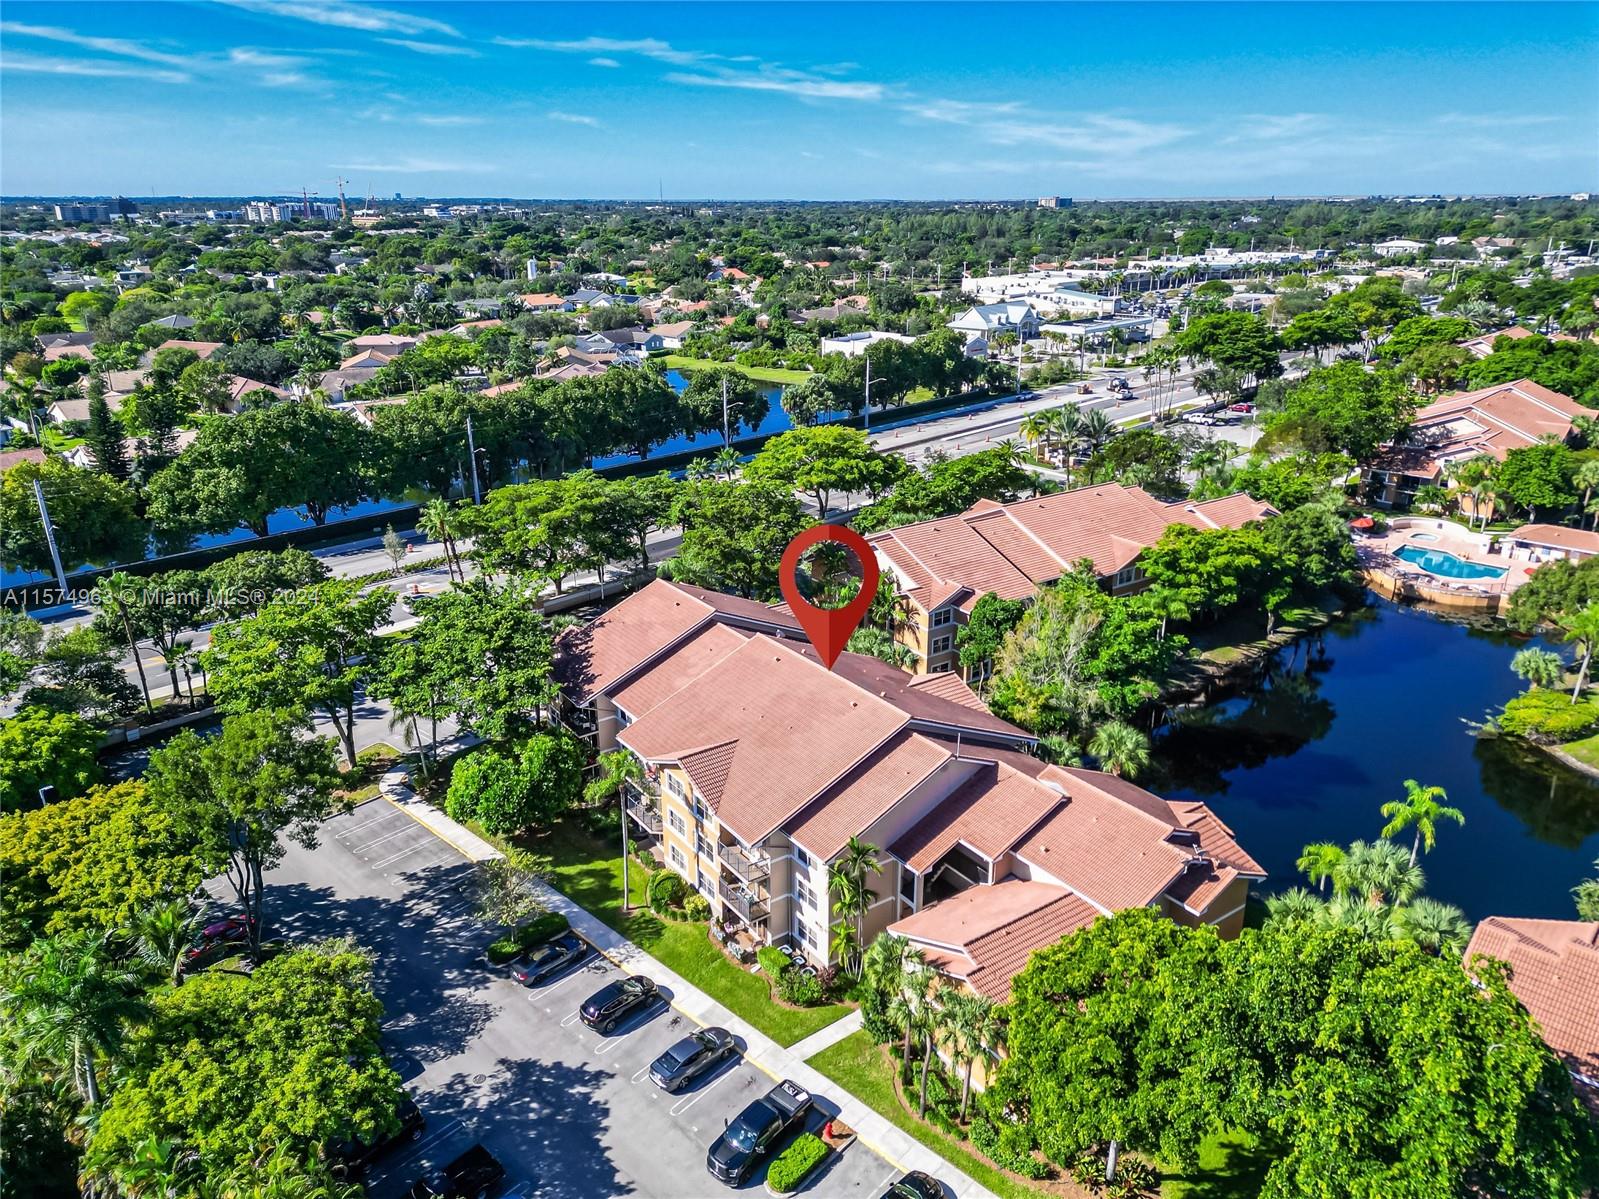 8721 Wiles Rd 103, Coral Springs, Florida 33067, 2 Bedrooms Bedrooms, ,2 BathroomsBathrooms,Residential,For Sale,8721 Wiles Rd 103,A11574963